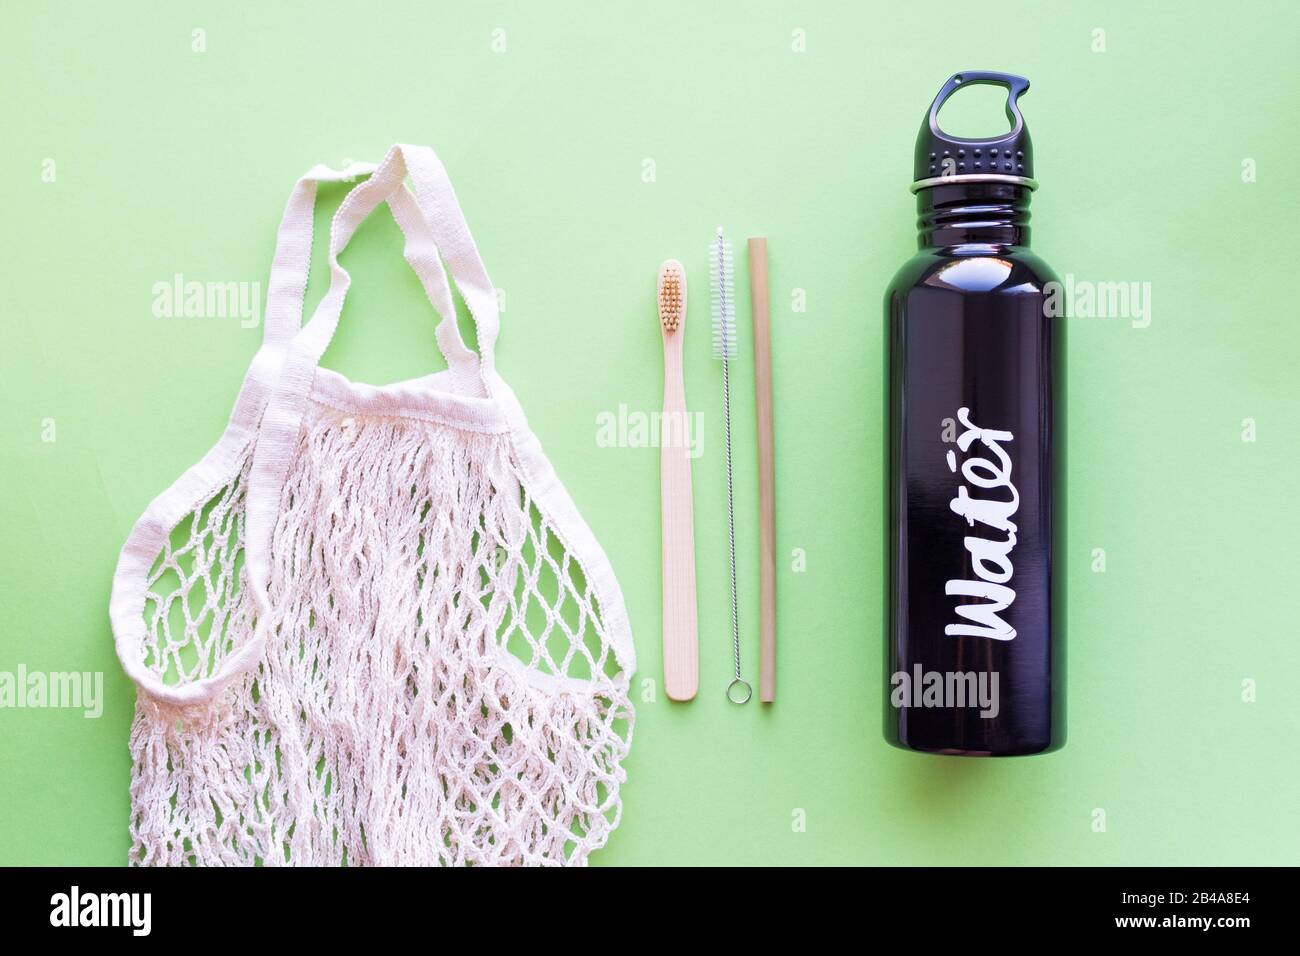 https://c8.alamy.com/comp/2B4A8E4/zero-waste-concept-bamboo-straw-and-toothbrush-cotton-bag-and-metal-water-bottle-on-green-background-sustainable-living-eco-friendly-plastic-free-2B4A8E4.jpg